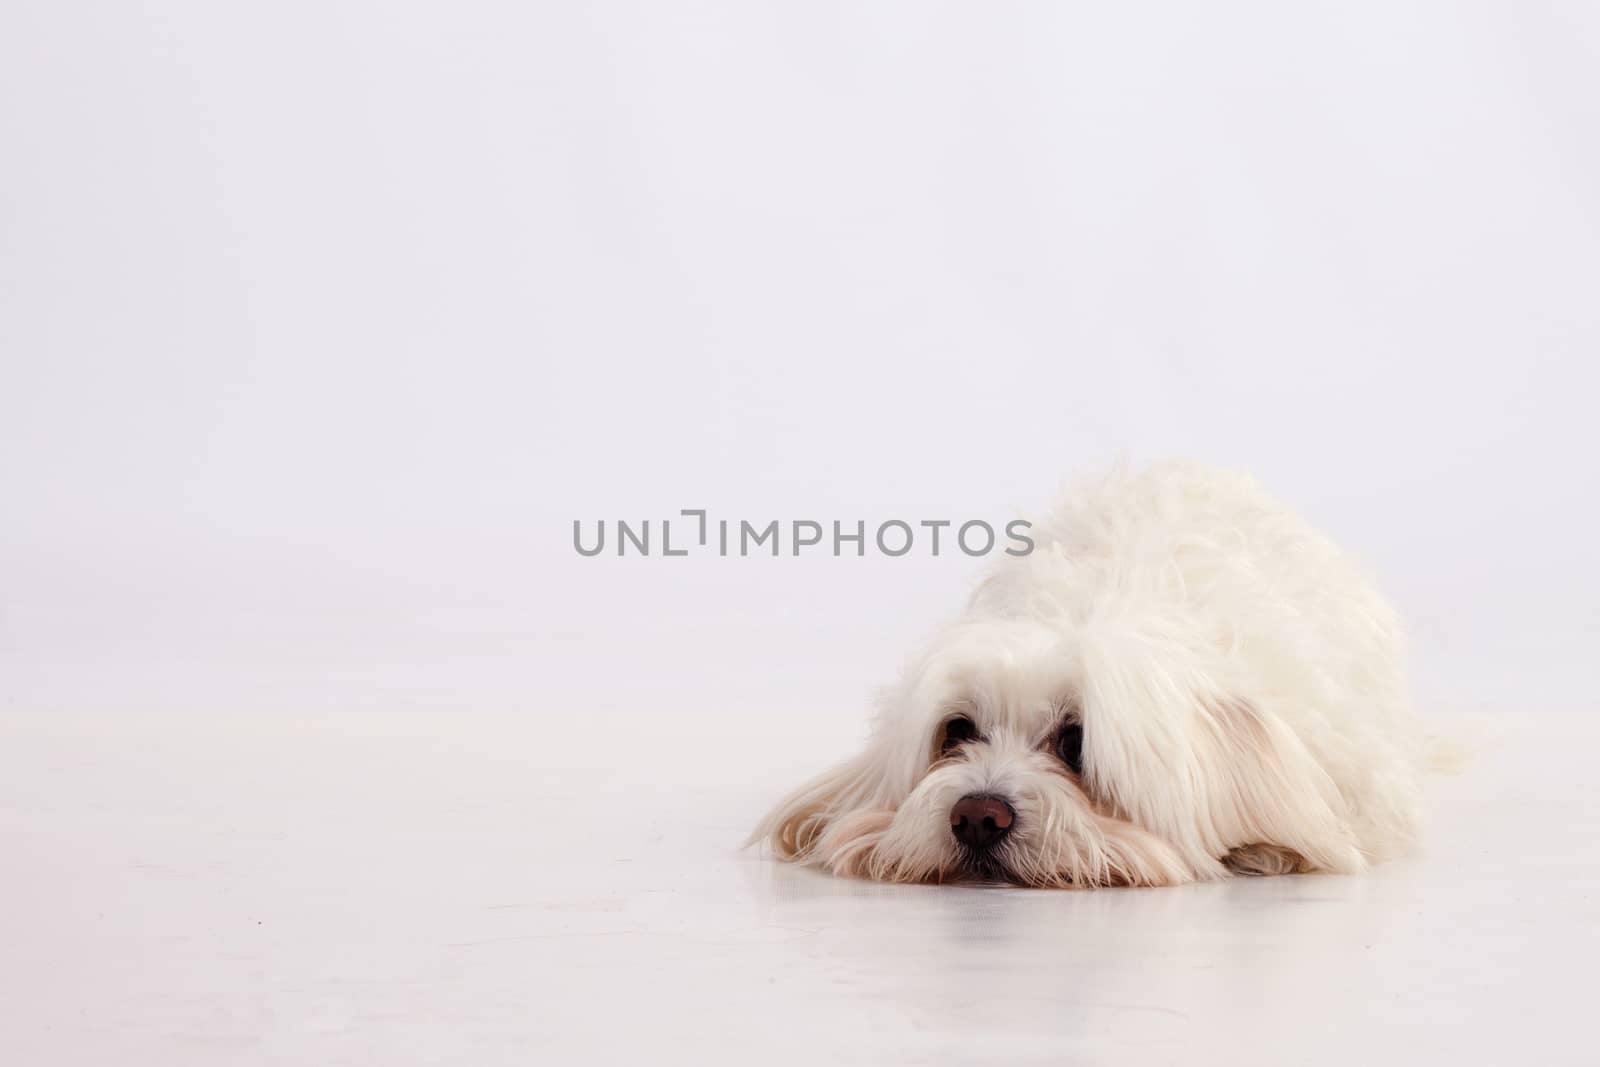 Maltese dog is sad on white background with place for text